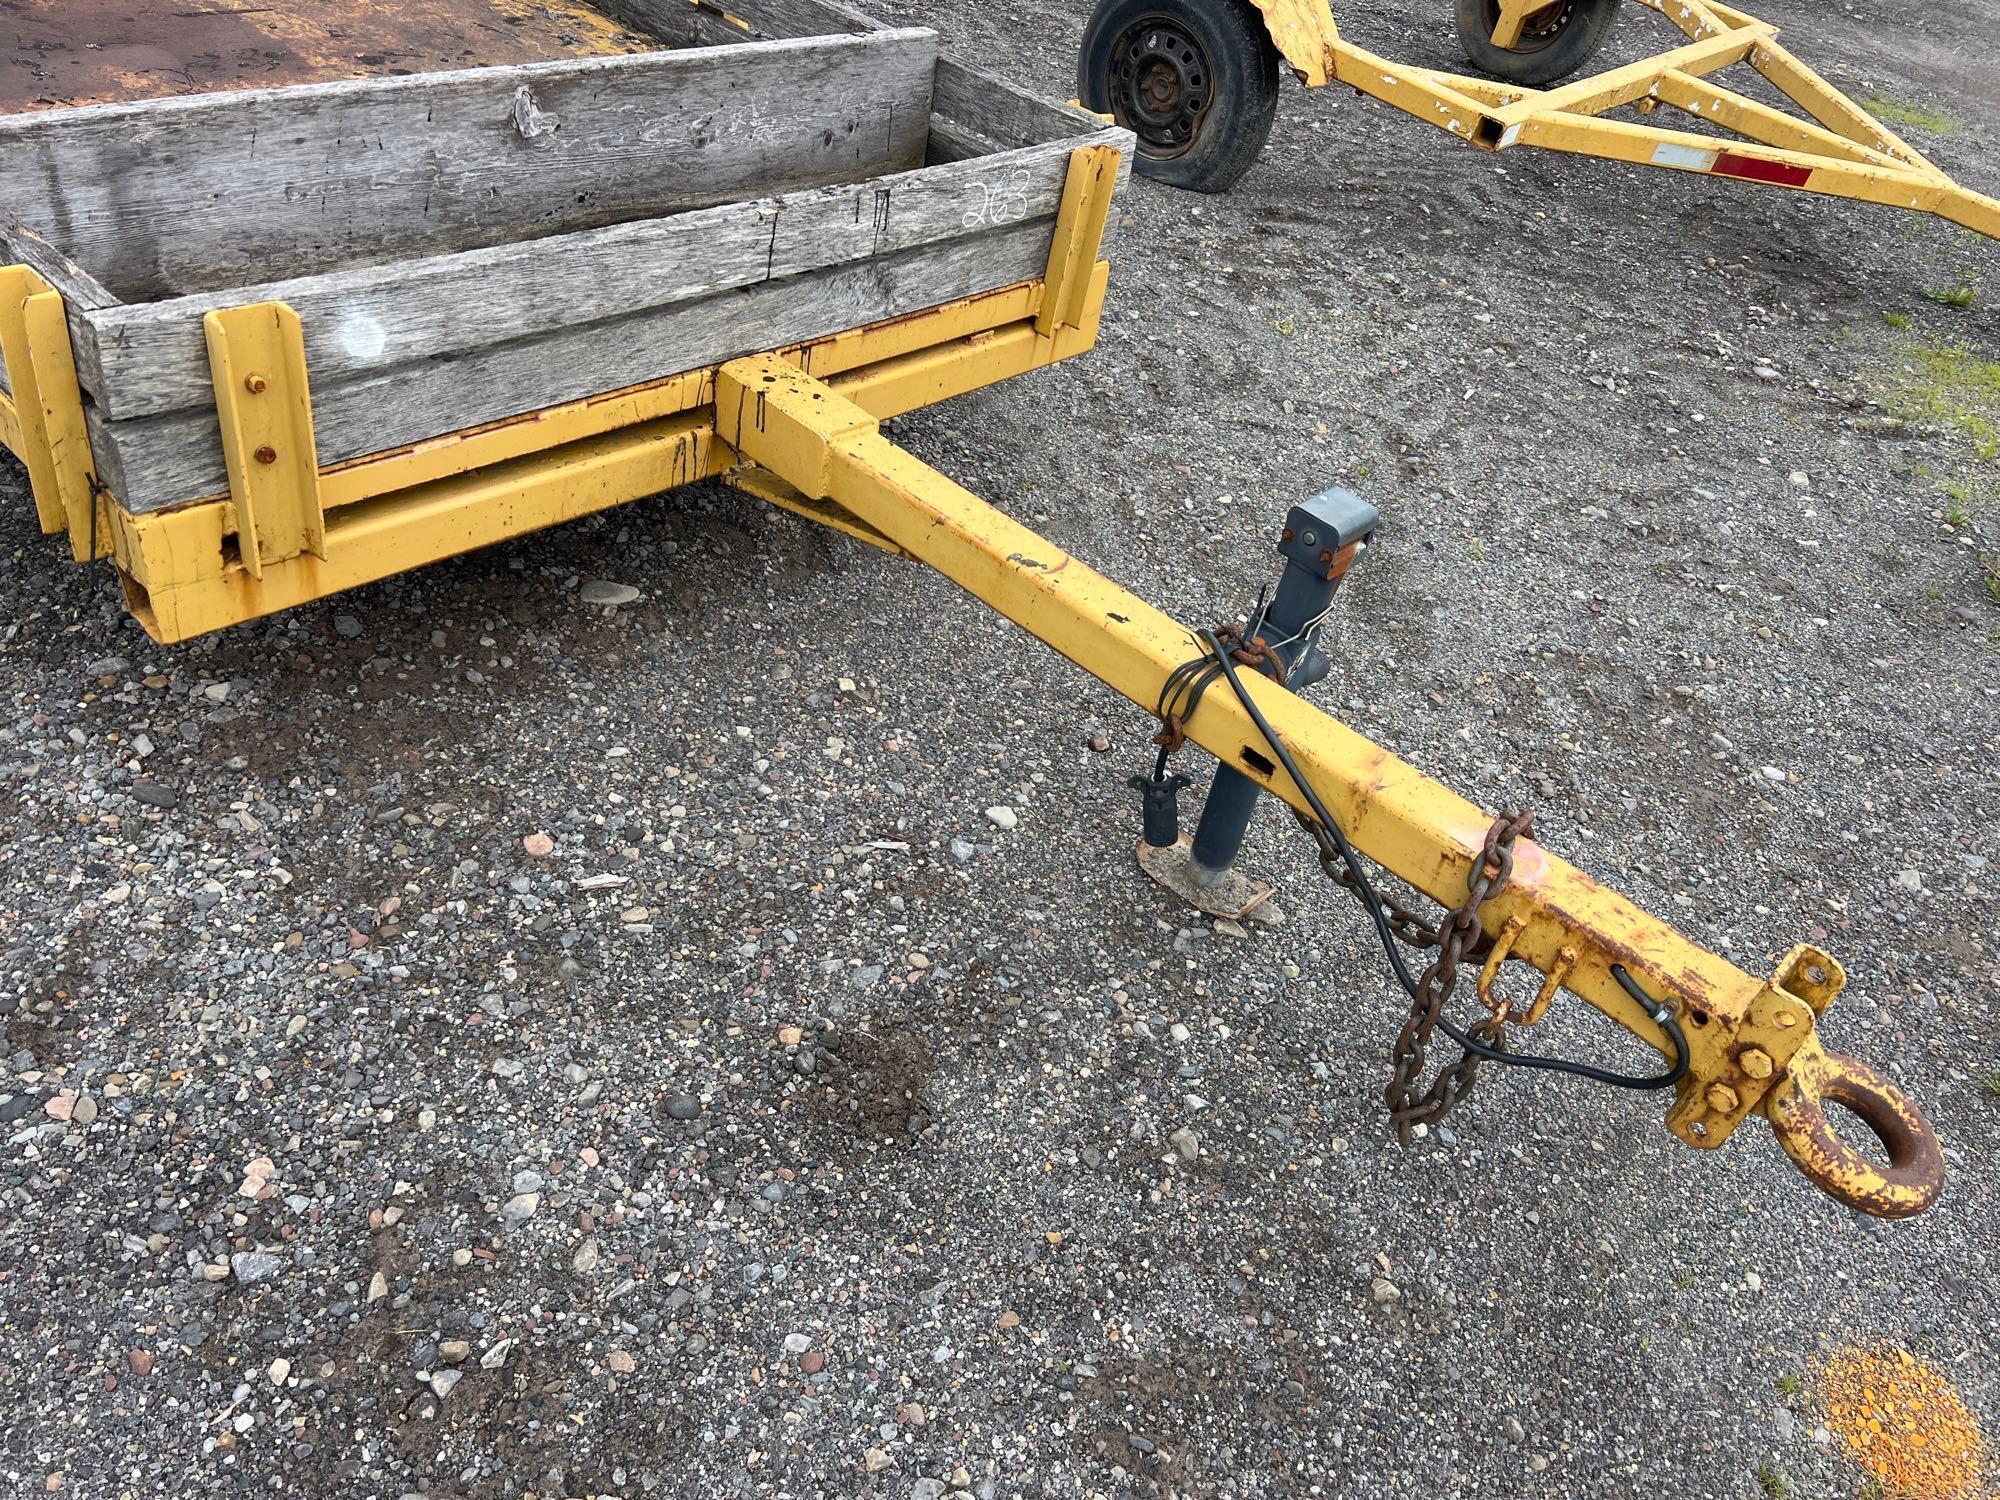 UTILITY TRAILER VN:N/A equipped with 5ft. X 9.5ft. deck, wood sidewalls, ST205/75R15 tires, single